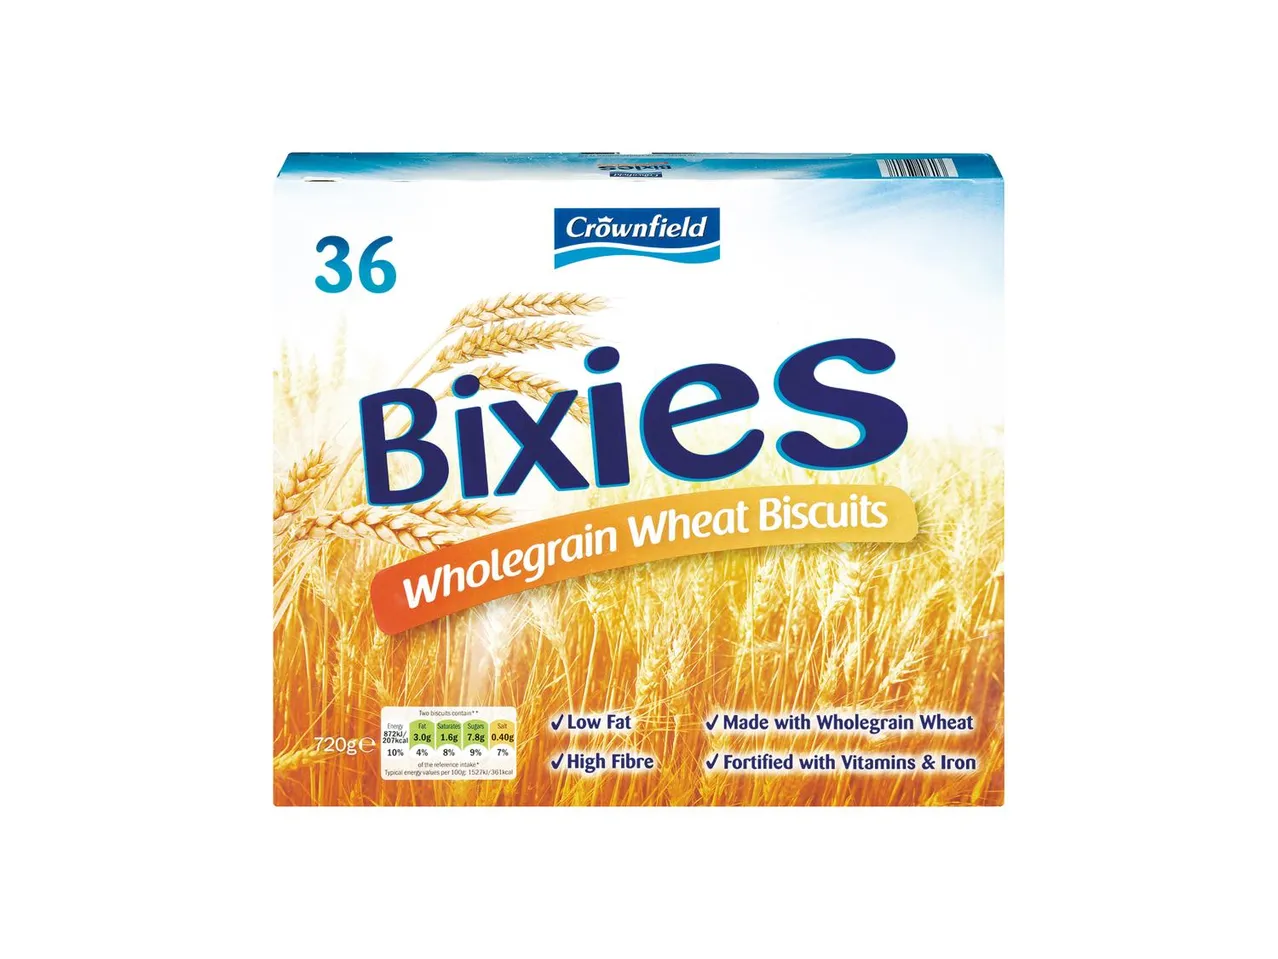 Go to full screen view: Crownfield Wheat Biscuits 36 Pack - Image 1